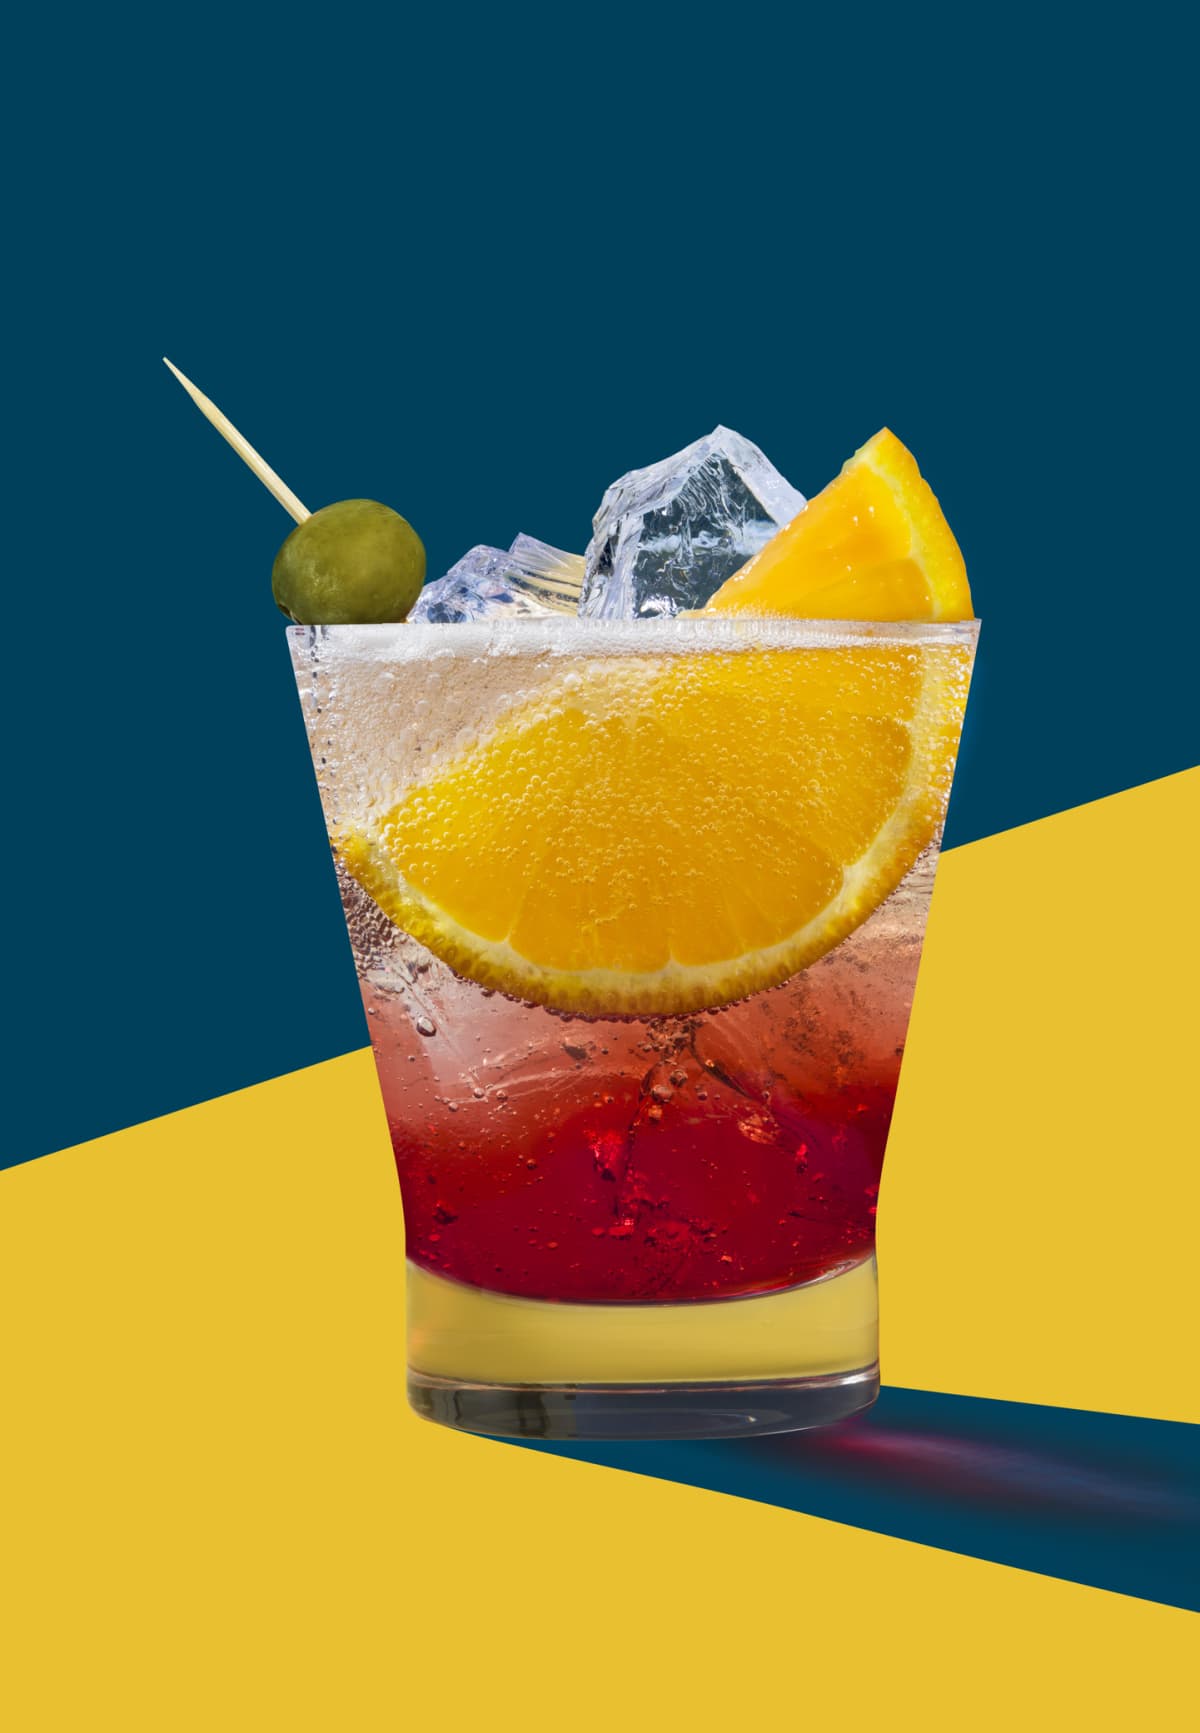 Negroni cocktail with toothpick in olive on a blue and yellow background